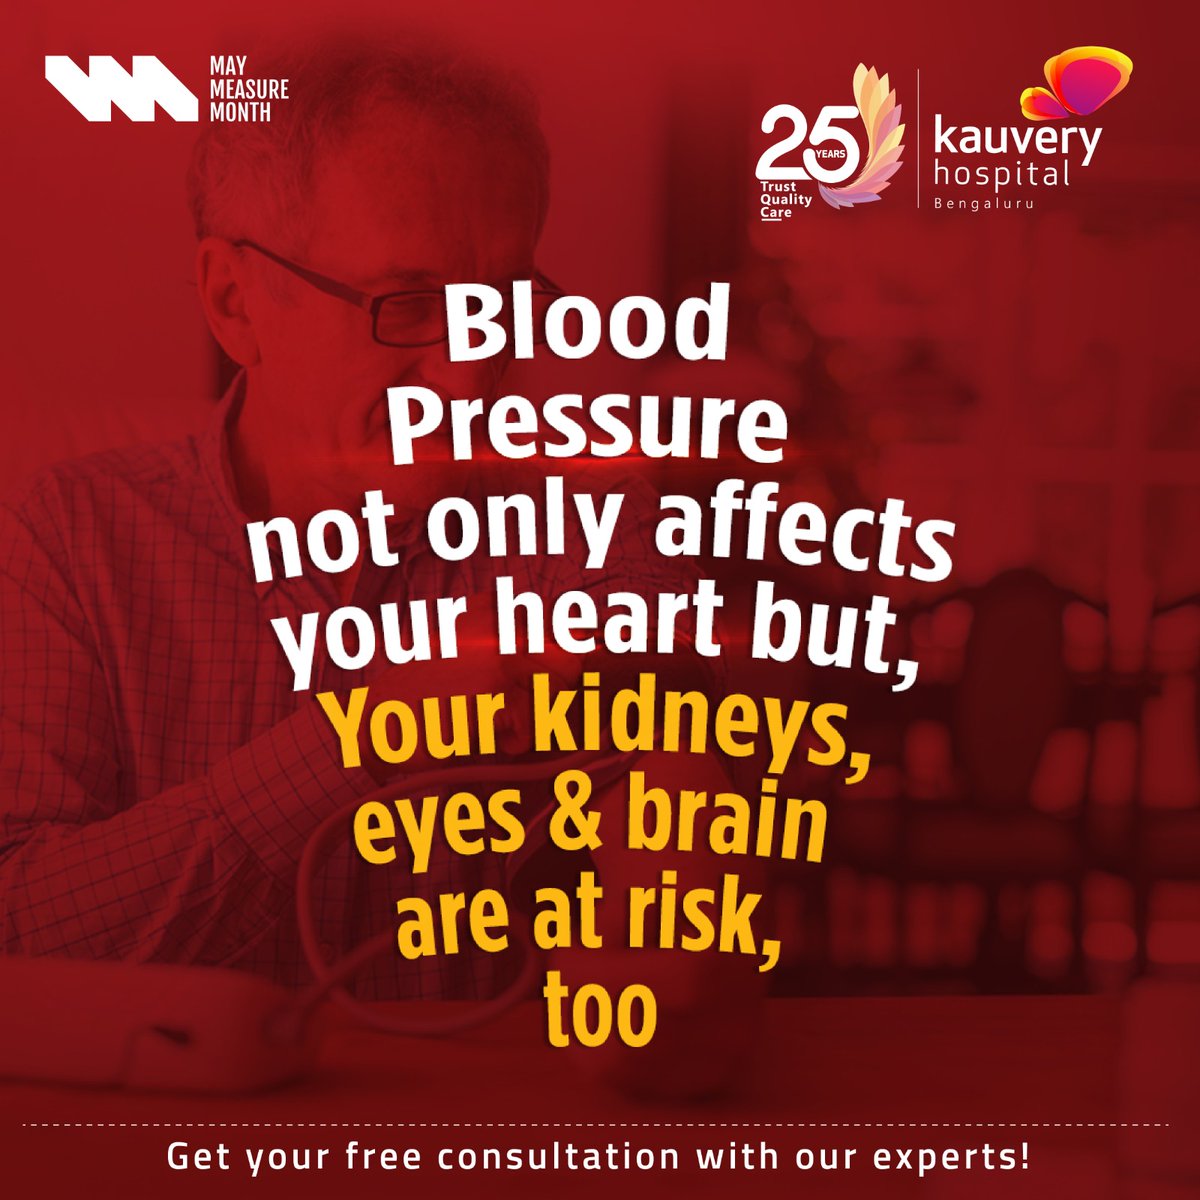 Taking charge of your health starts with understanding your blood pressure.

Schedule a free consultation today - 080 6801 6801

#maymeasuremonth #kauveryhospitals #multispecialityhospital #kidneyhealth #hearthealth #bloodpressurecontrol